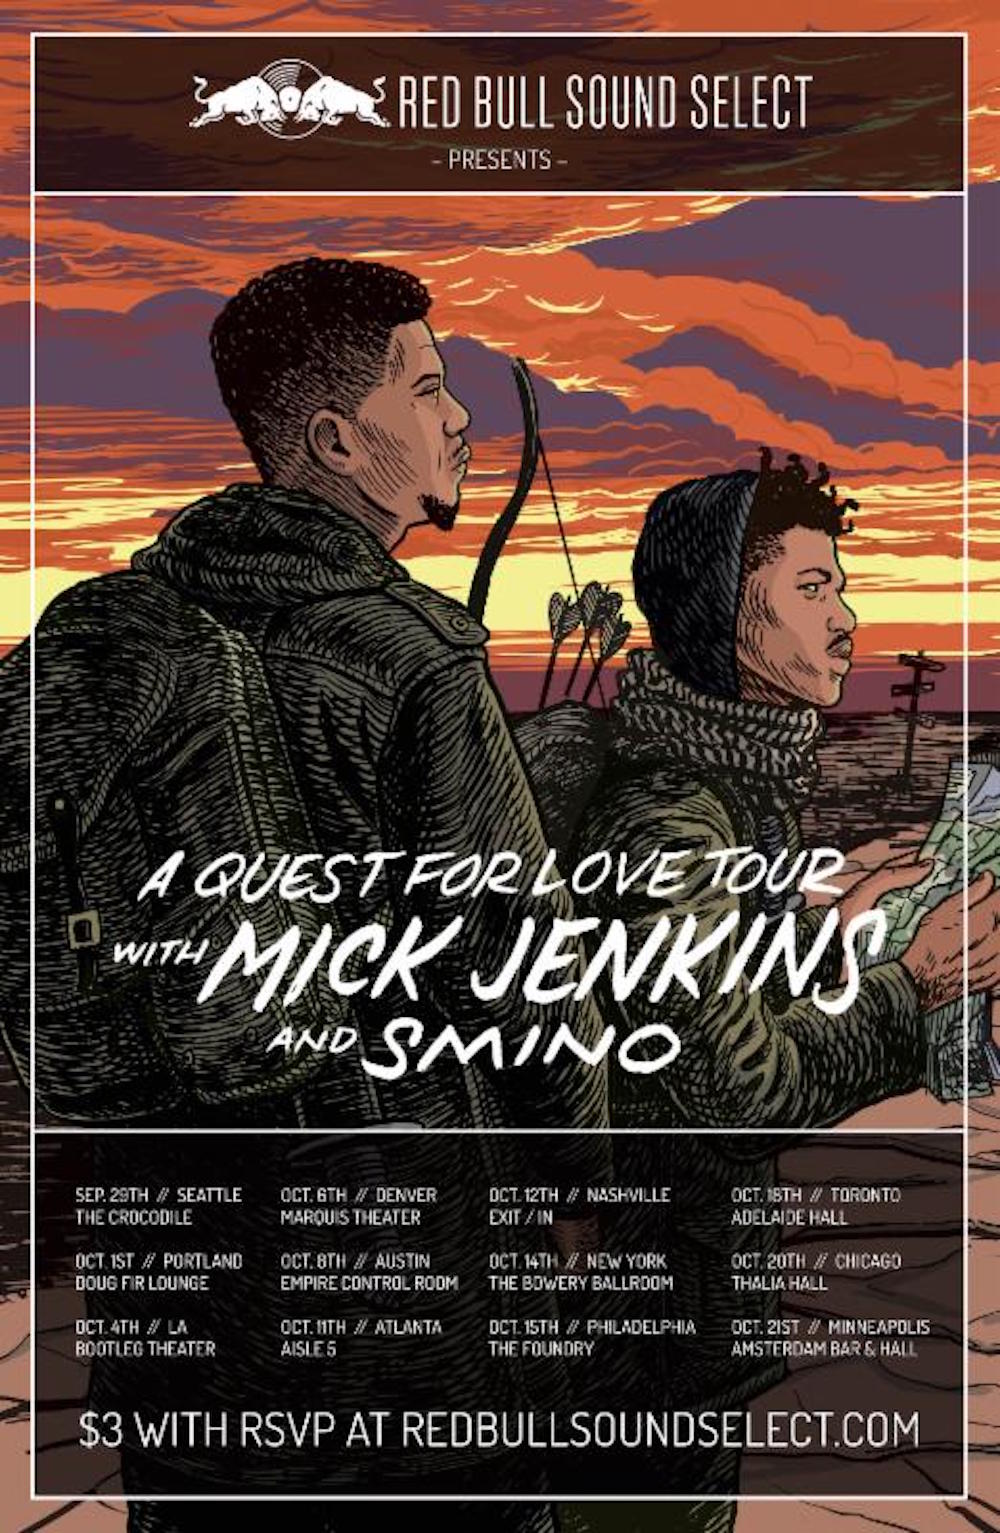 Mick Jenkins Announces 'The Healing Component' Release Date, Drops New Single 'Spread Love'